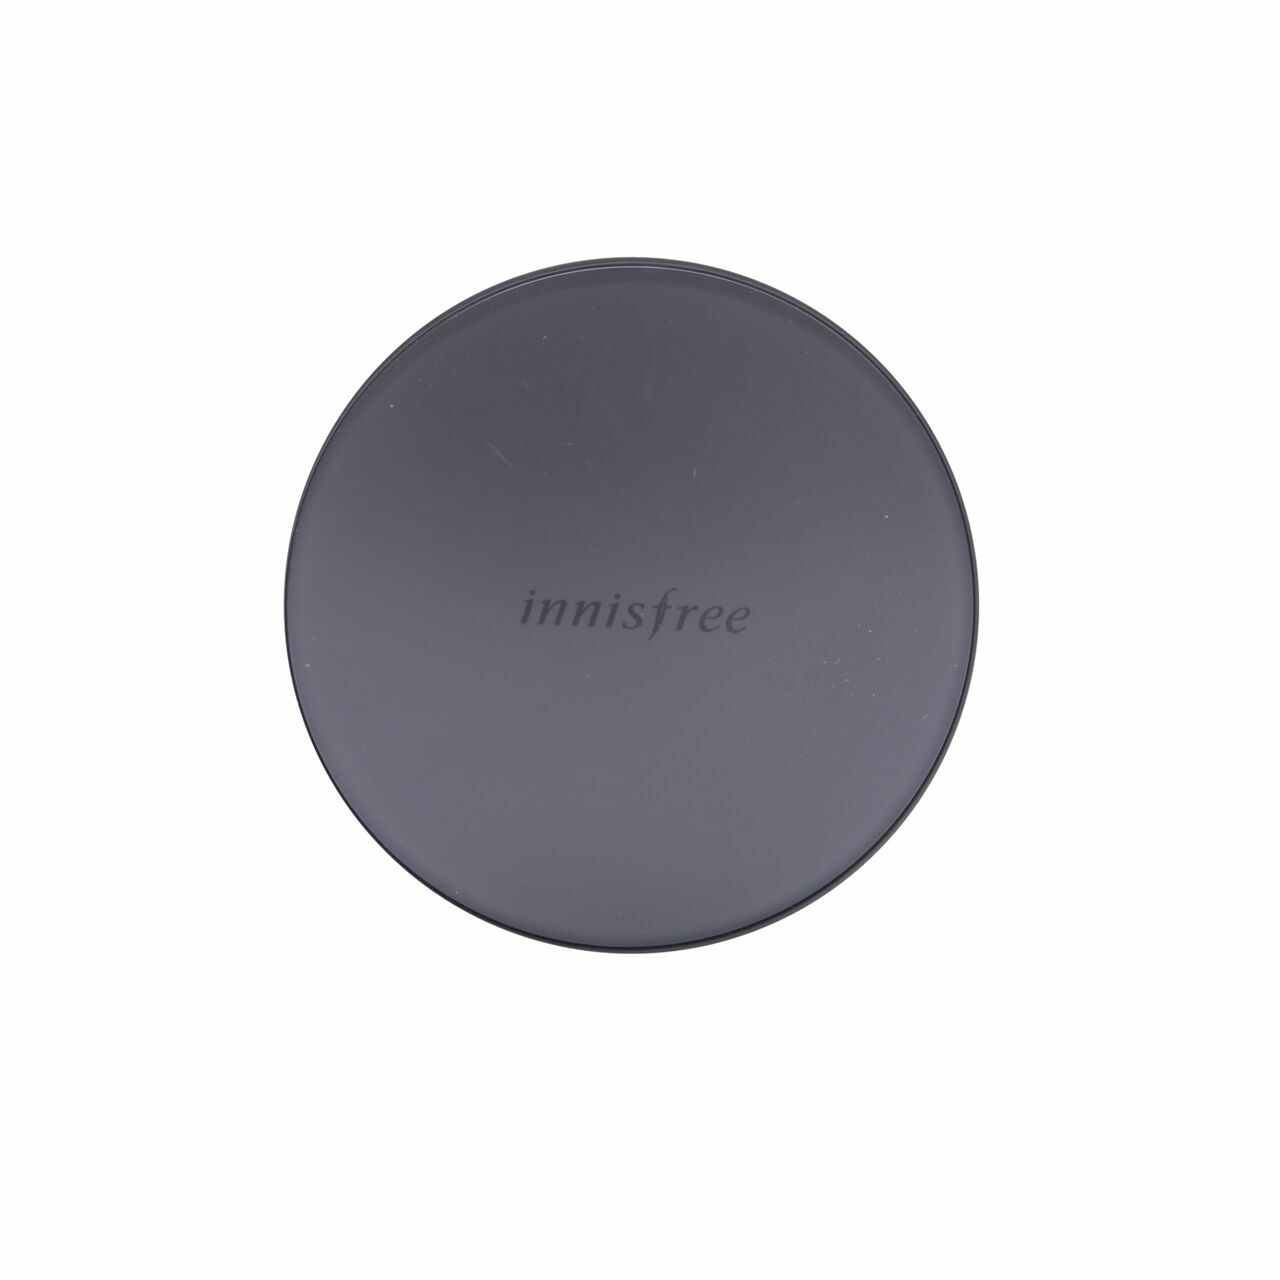 Innisfree My To Go Cushion N23 Faces